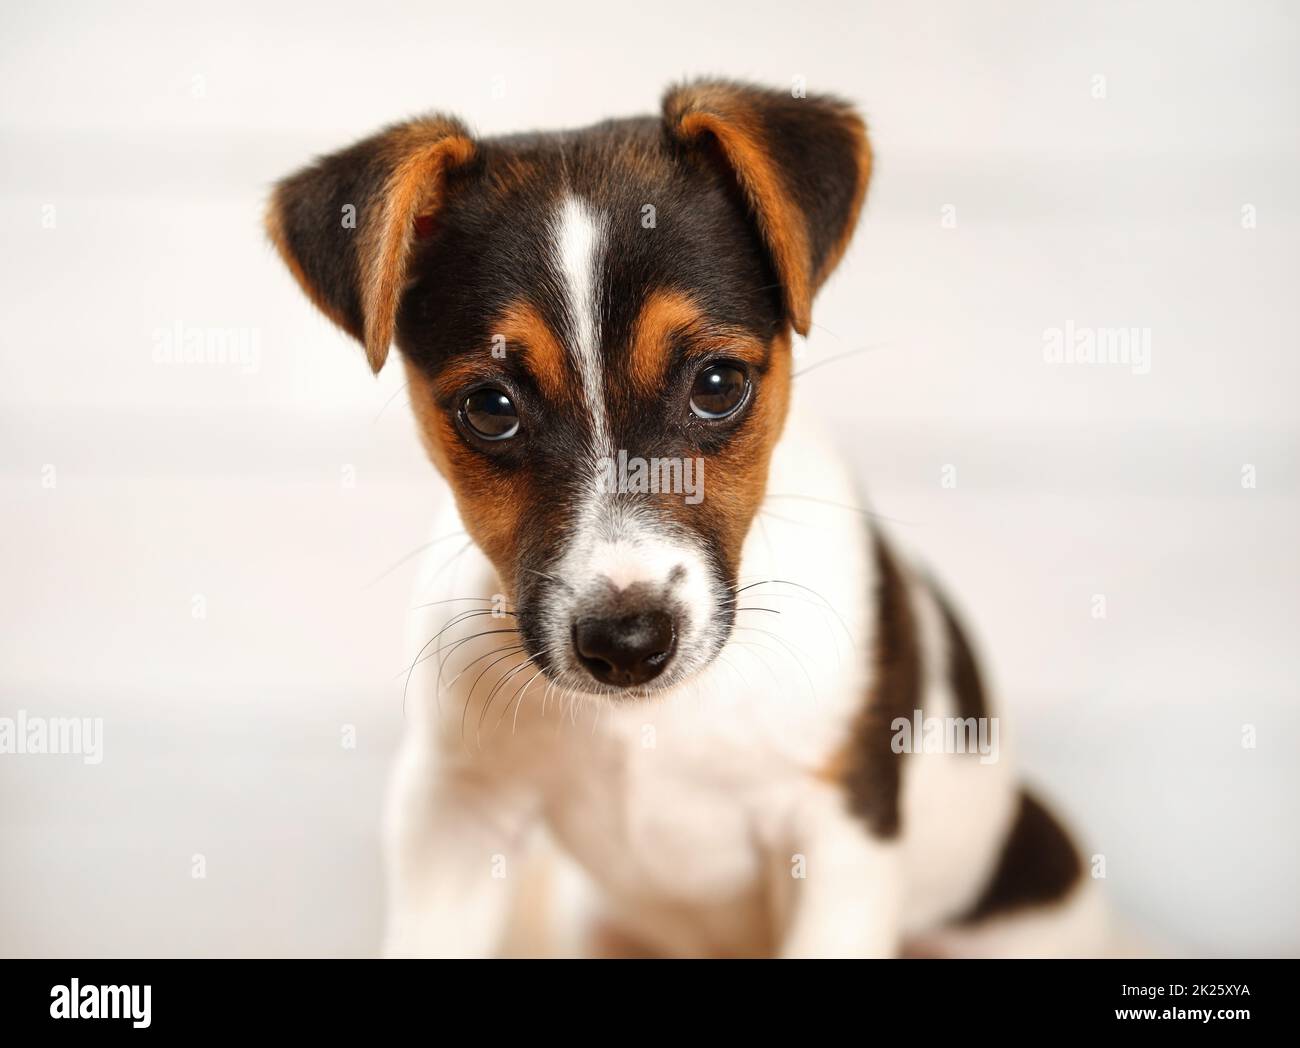 2 months old Jack Russell terrier puppy looking into camera. Studio shot on light background, detail to head. Stock Photo